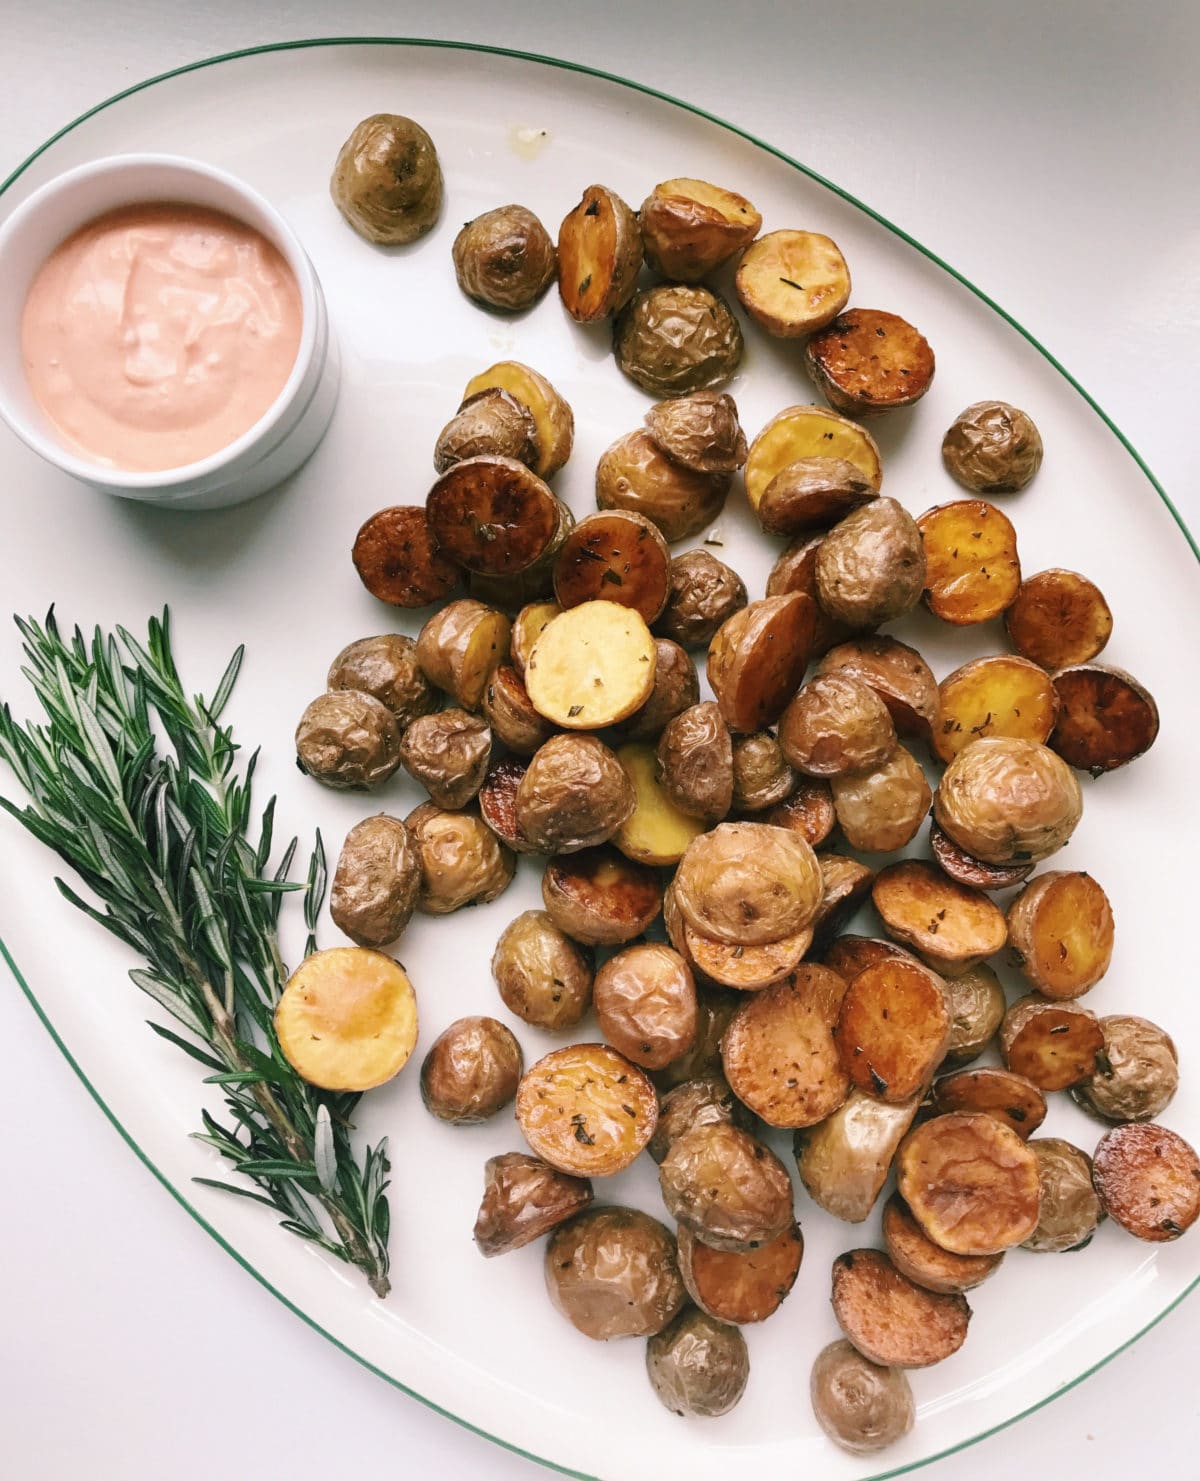 Roasted Potatoes with Harissa Dipping Sauce / Katie Workman / themom100.com